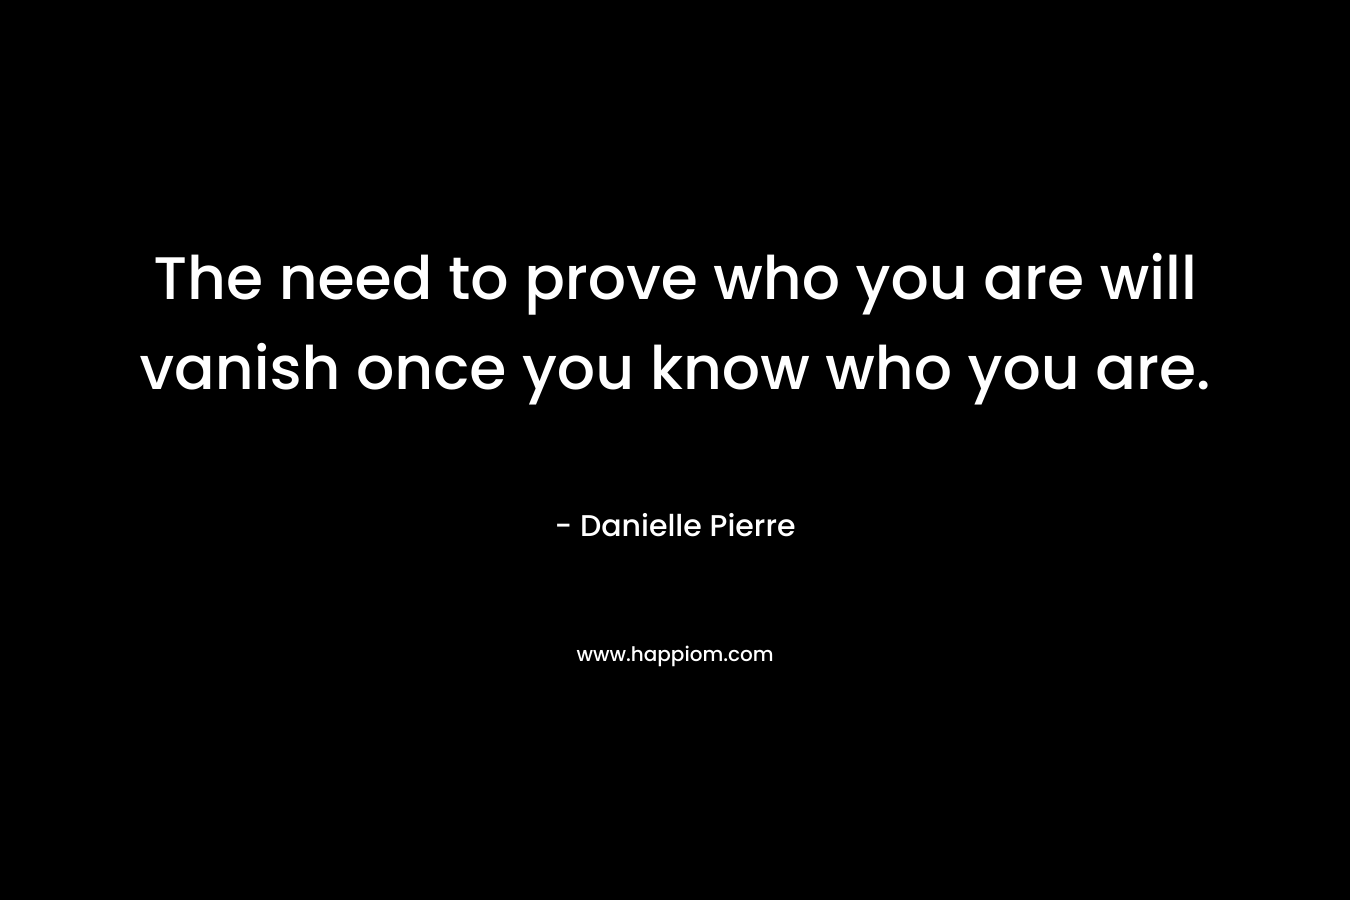 The need to prove who you are will vanish once you know who you are.